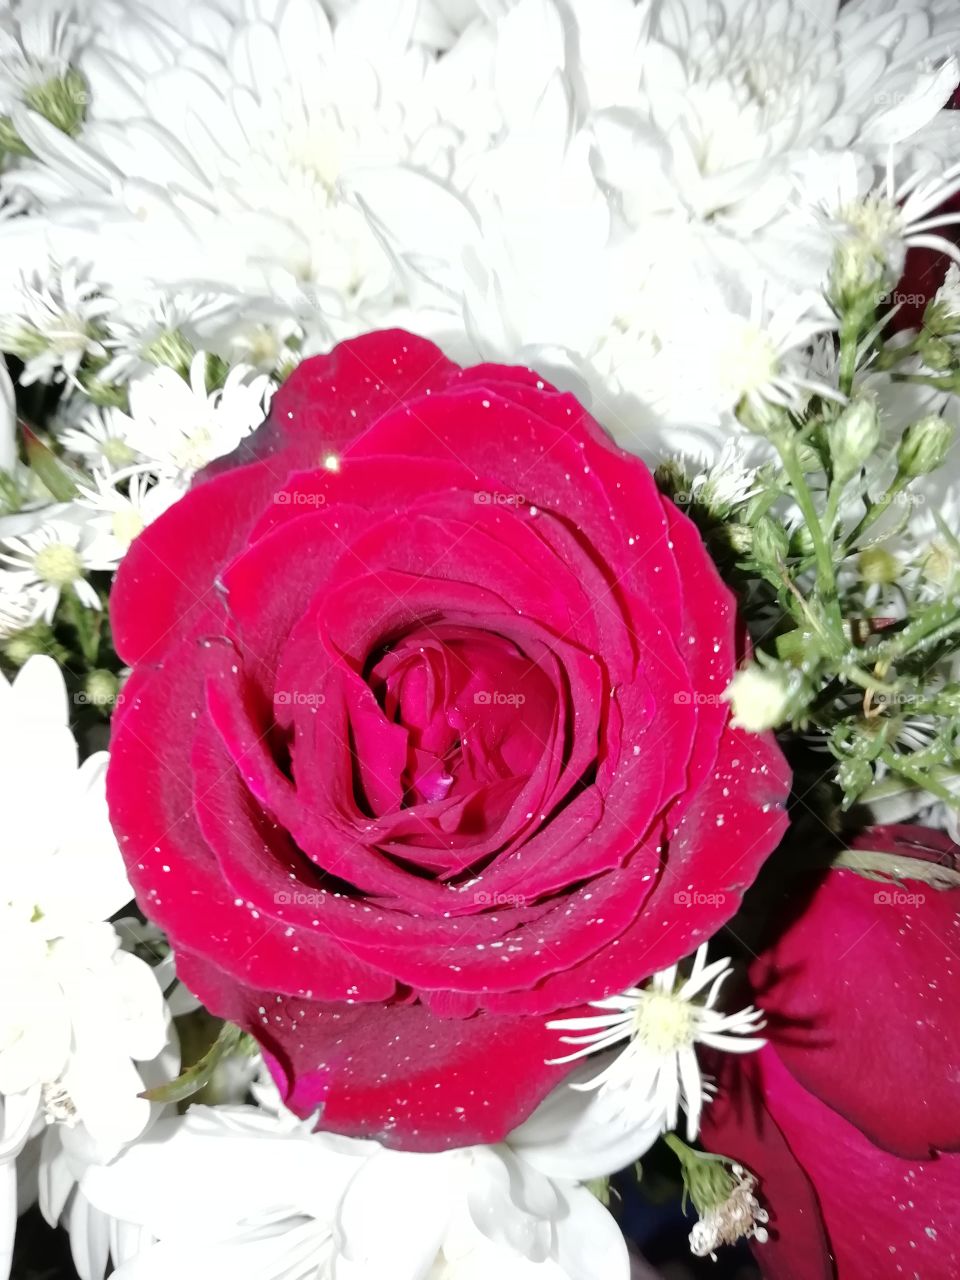 Flowers from a bouquet. Prettyness all-over